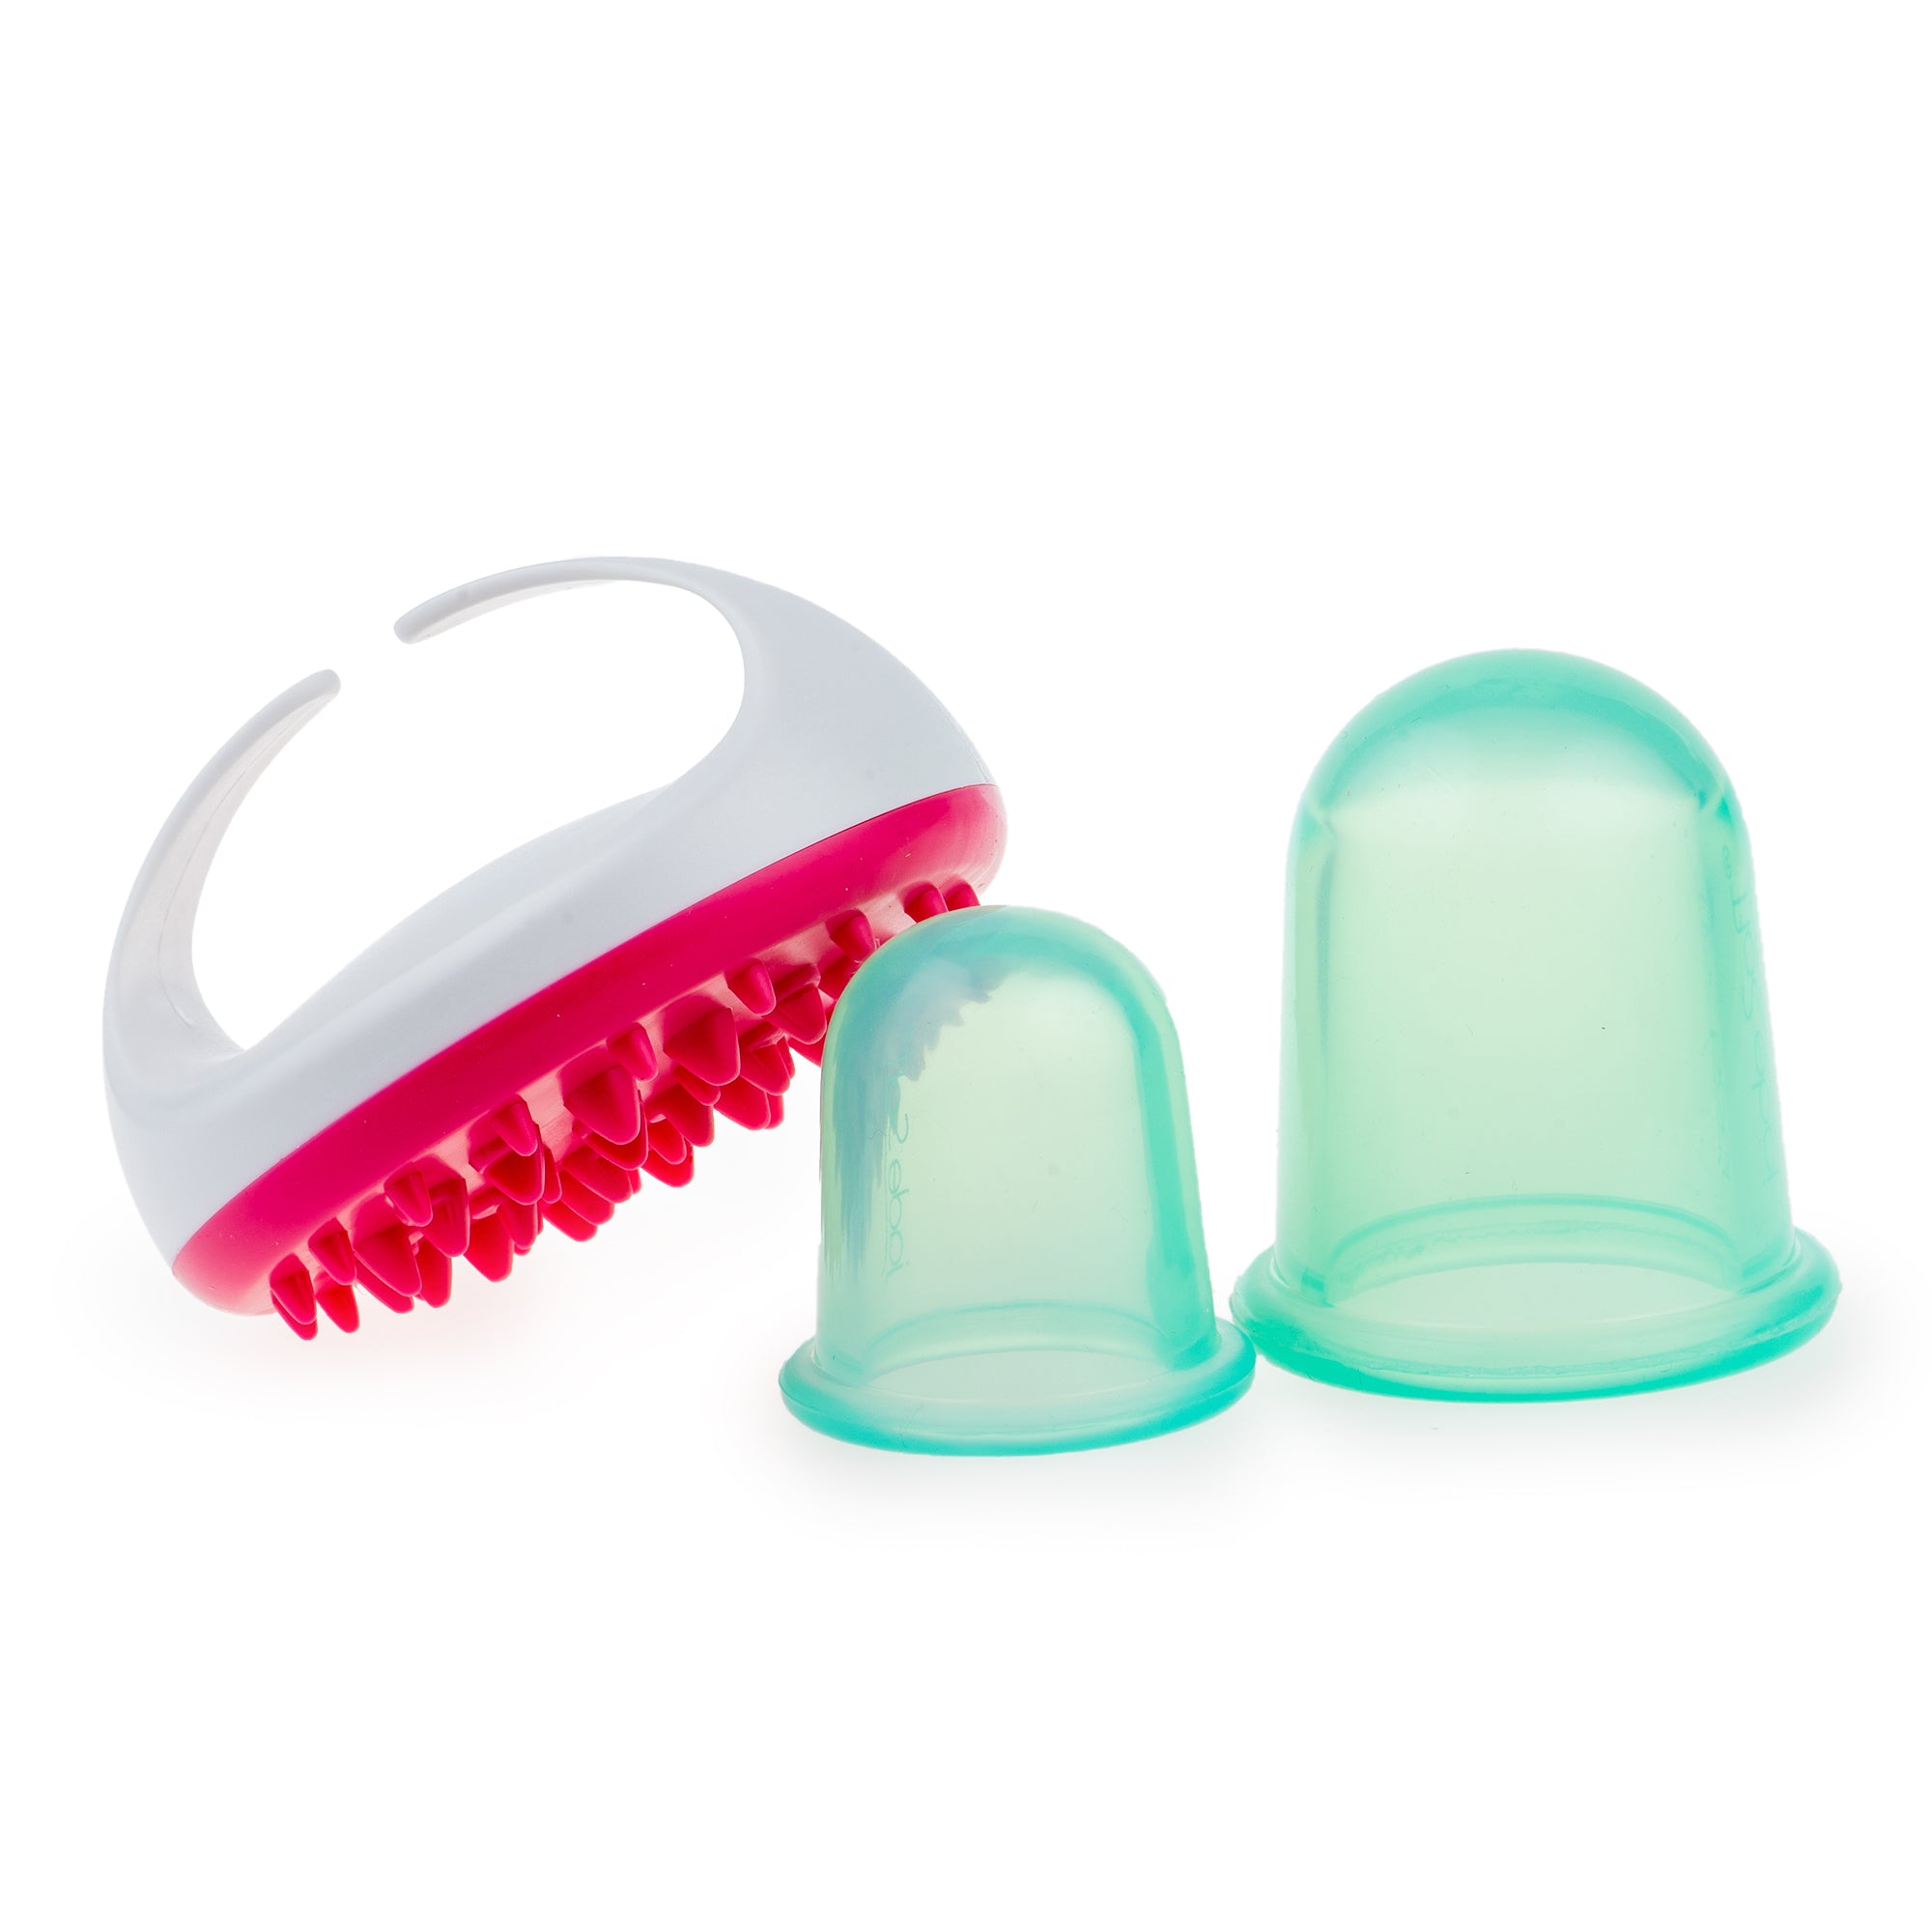 Jade soft® Anti-Cellulite Silicone Cupping Set